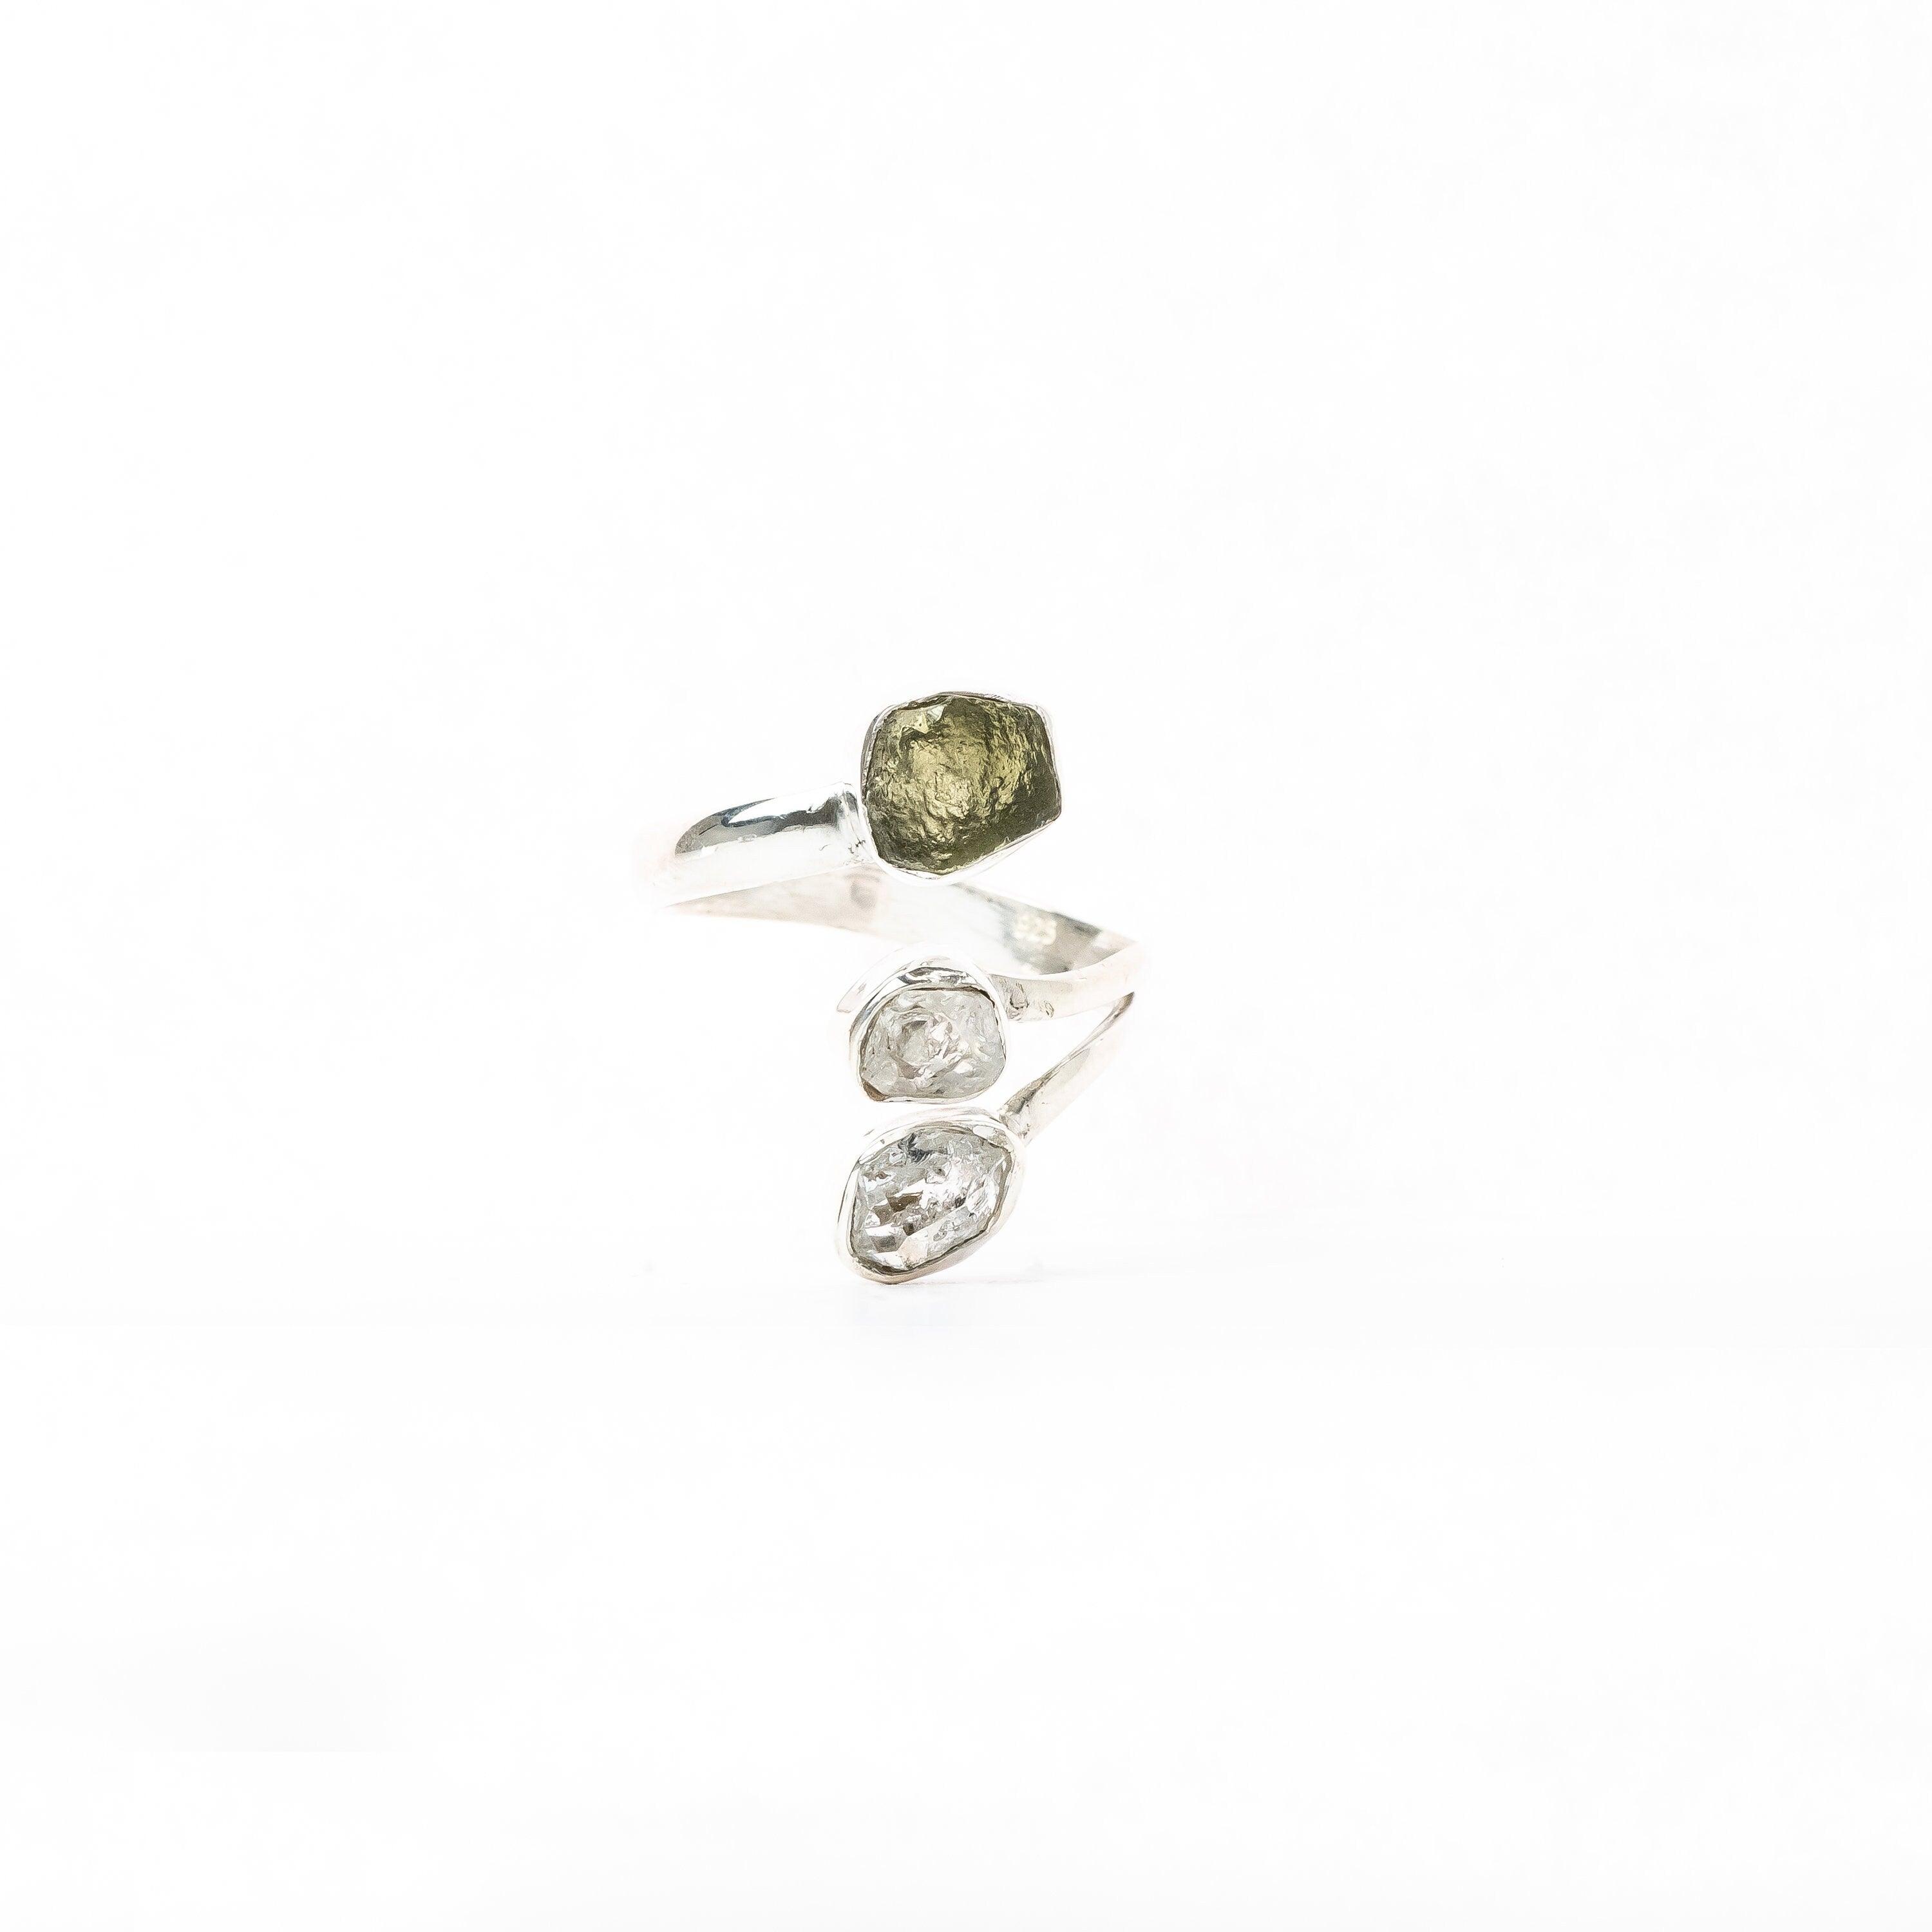 Certified Czech Moldavite & Herkimer Rough Ring 925 Solid Sterling Silver Handmade Natural Gemstone Designer Jewelry ( All sizes available) - Silverhubjewels